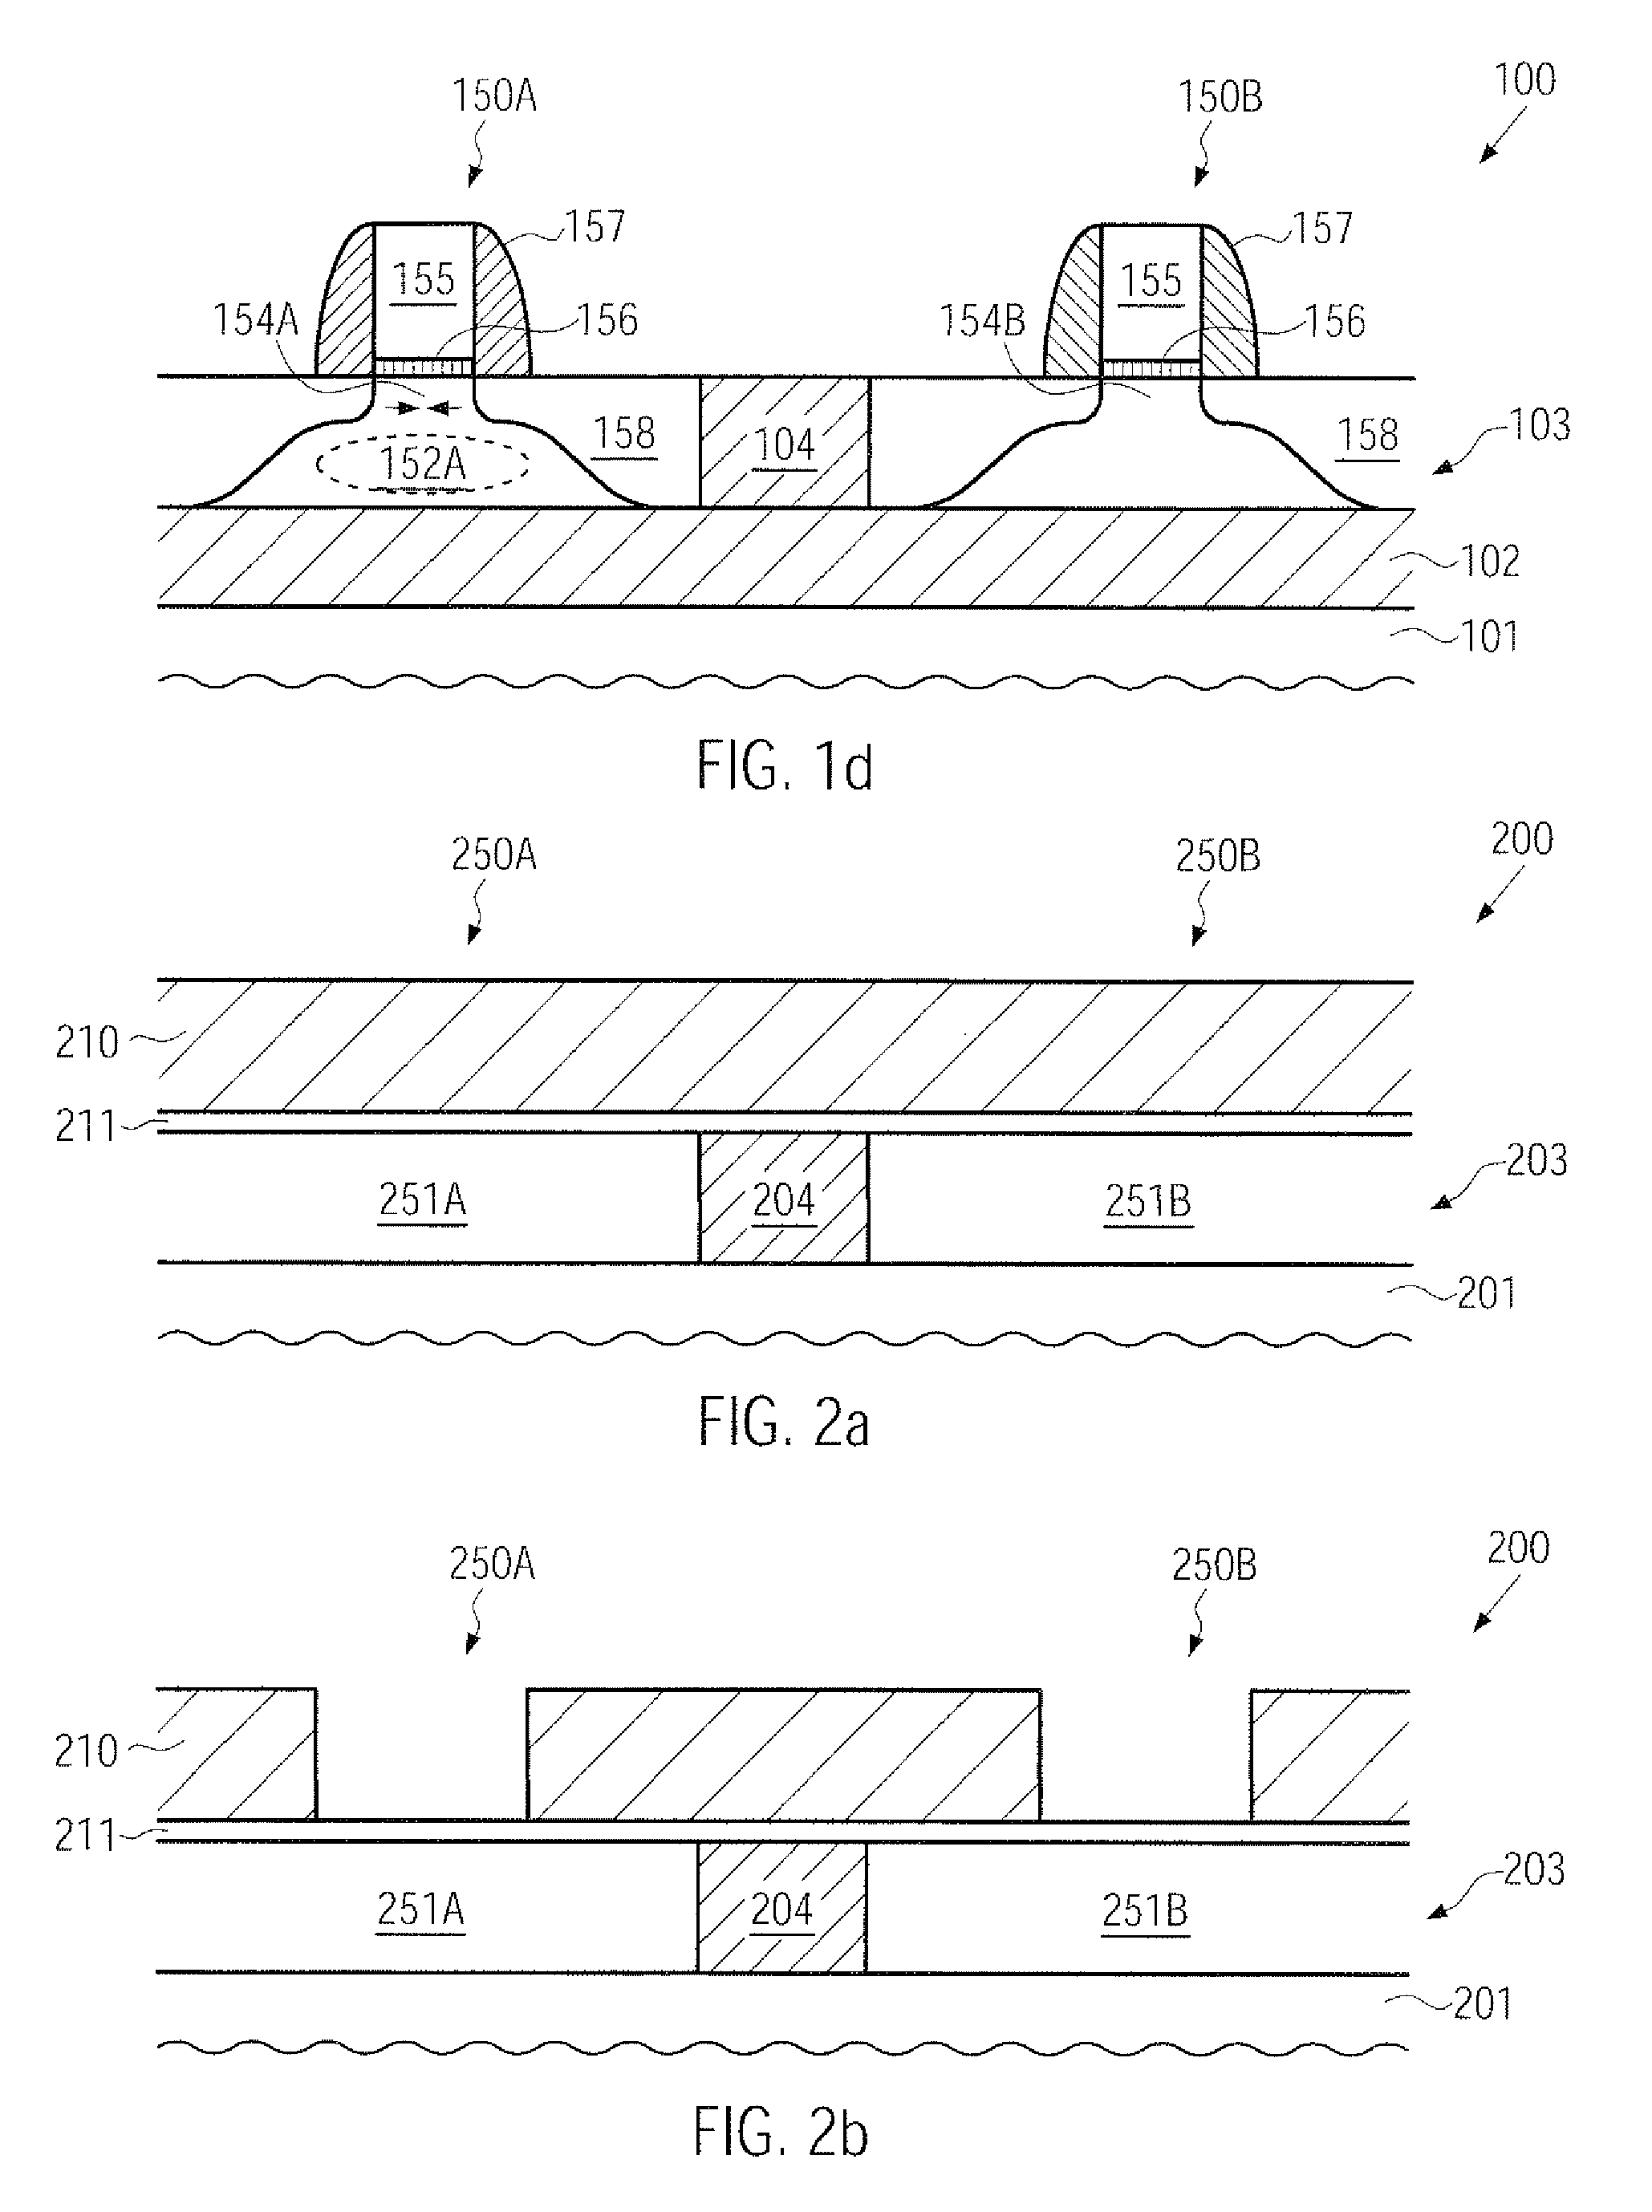 Method of creating a strained channel region in a transistor by deep implantation of strain-inducing species below the channel region